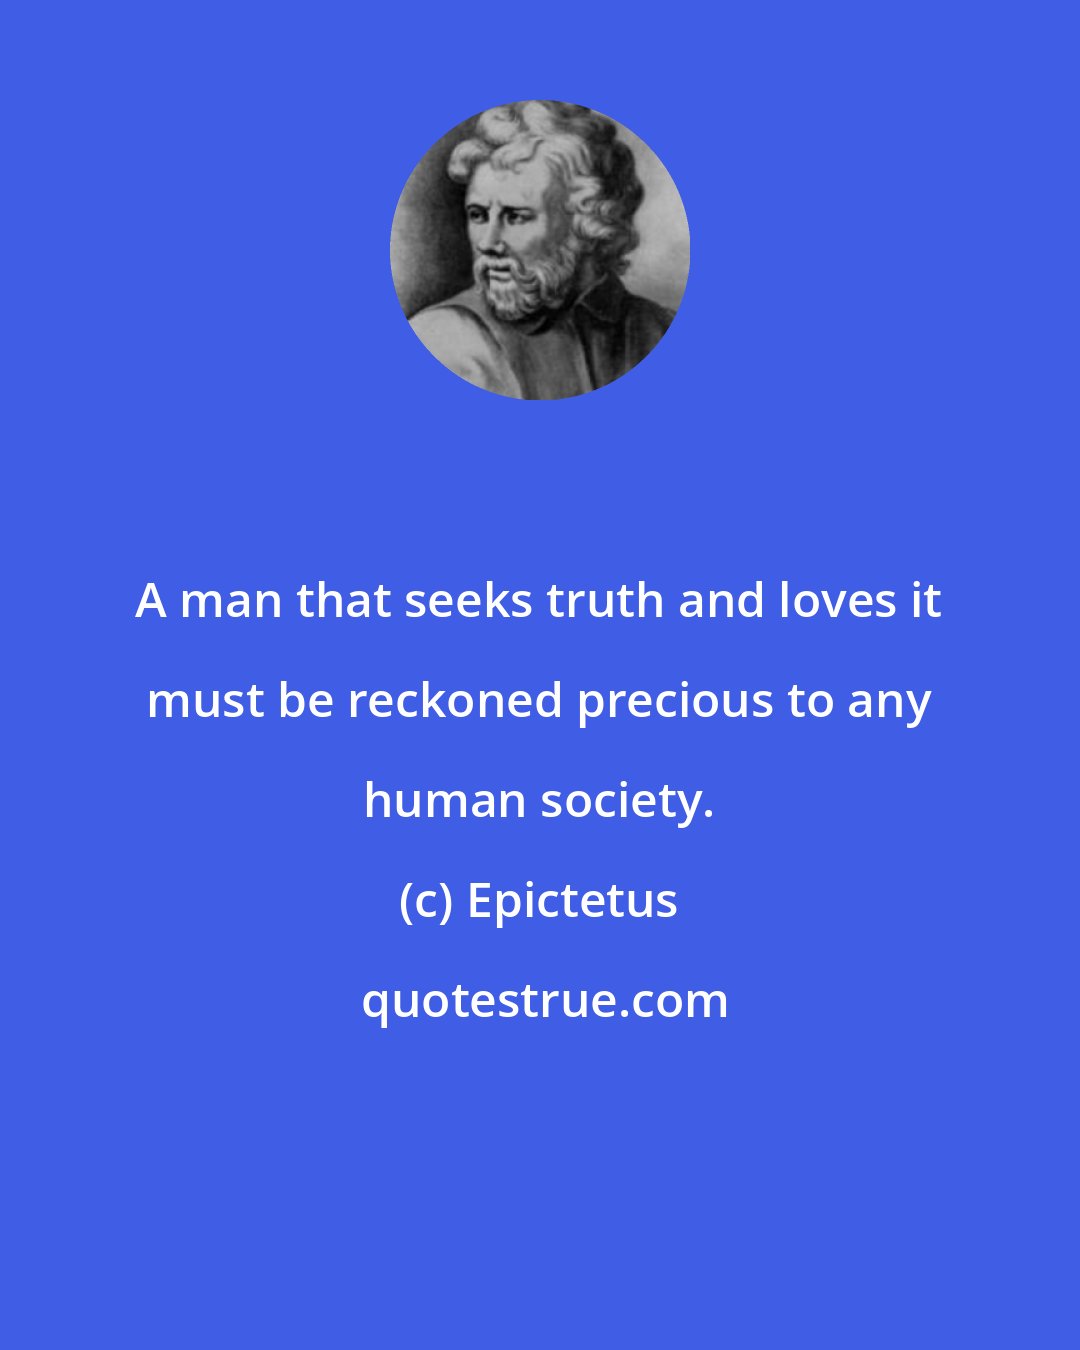 Epictetus: A man that seeks truth and loves it must be reckoned precious to any human society.